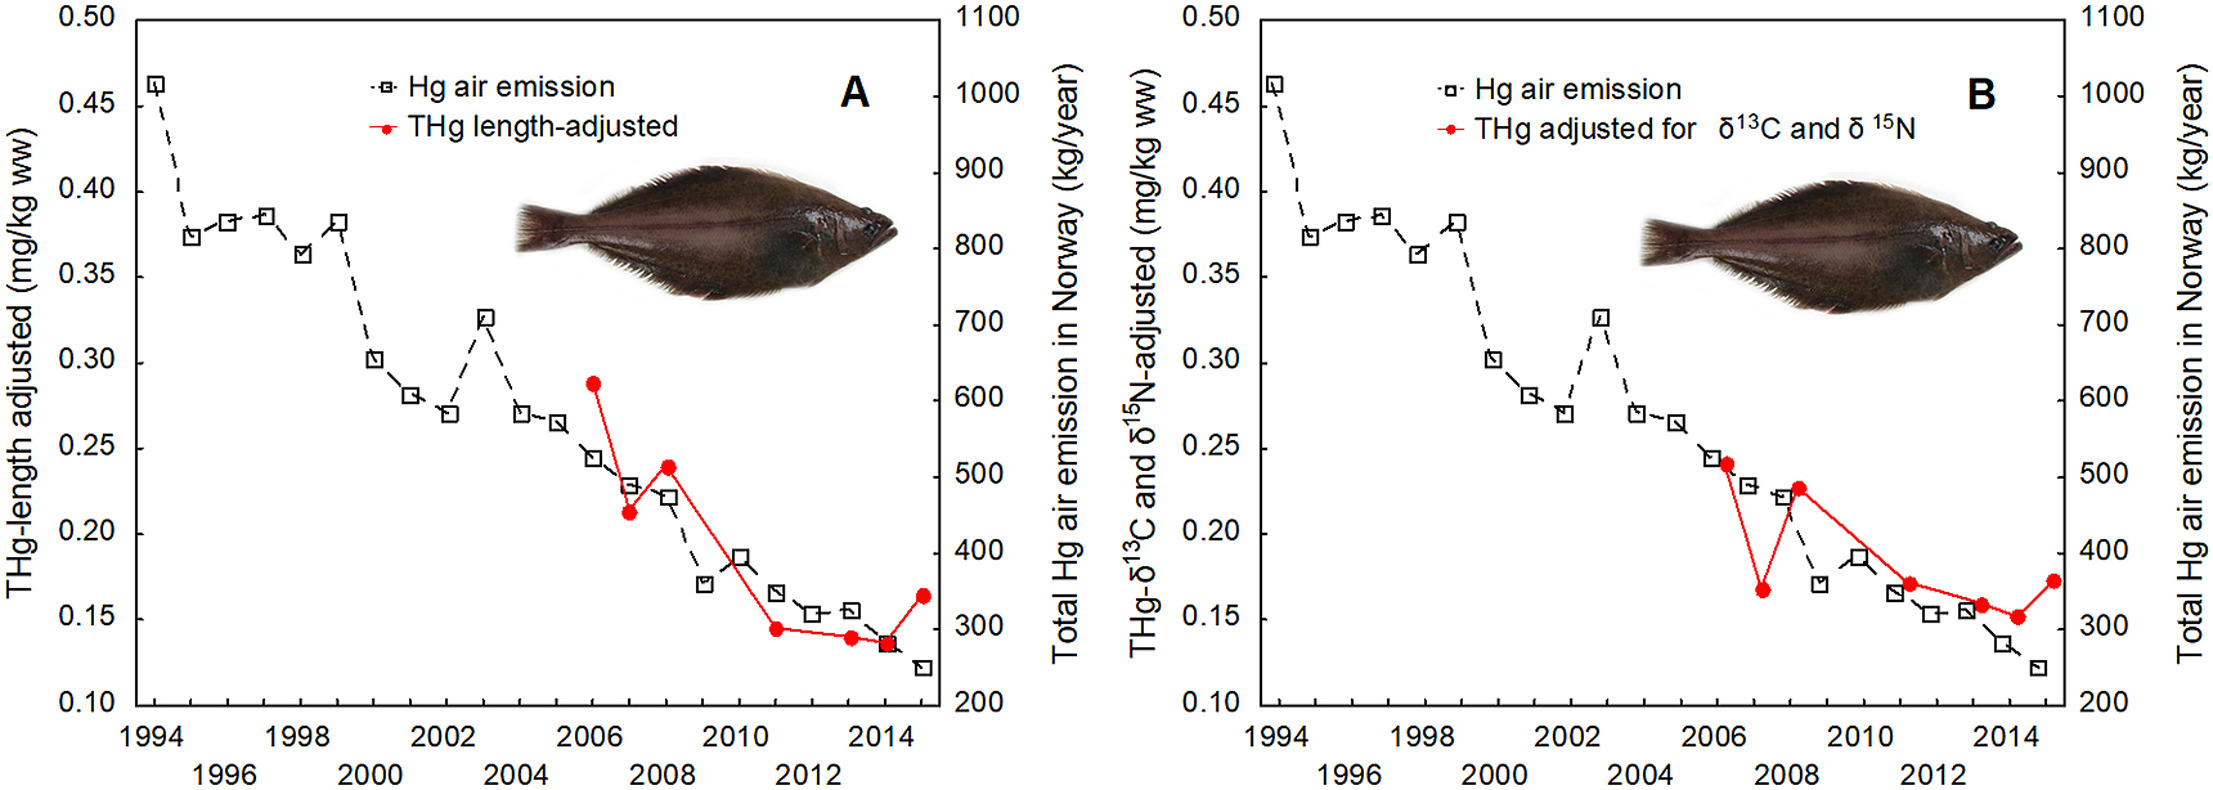 Graphs showing how the decline in mercury in Greenland halibut over time, corrected for fish length (left) and diet (right), coincides with reduced mercury emissions.